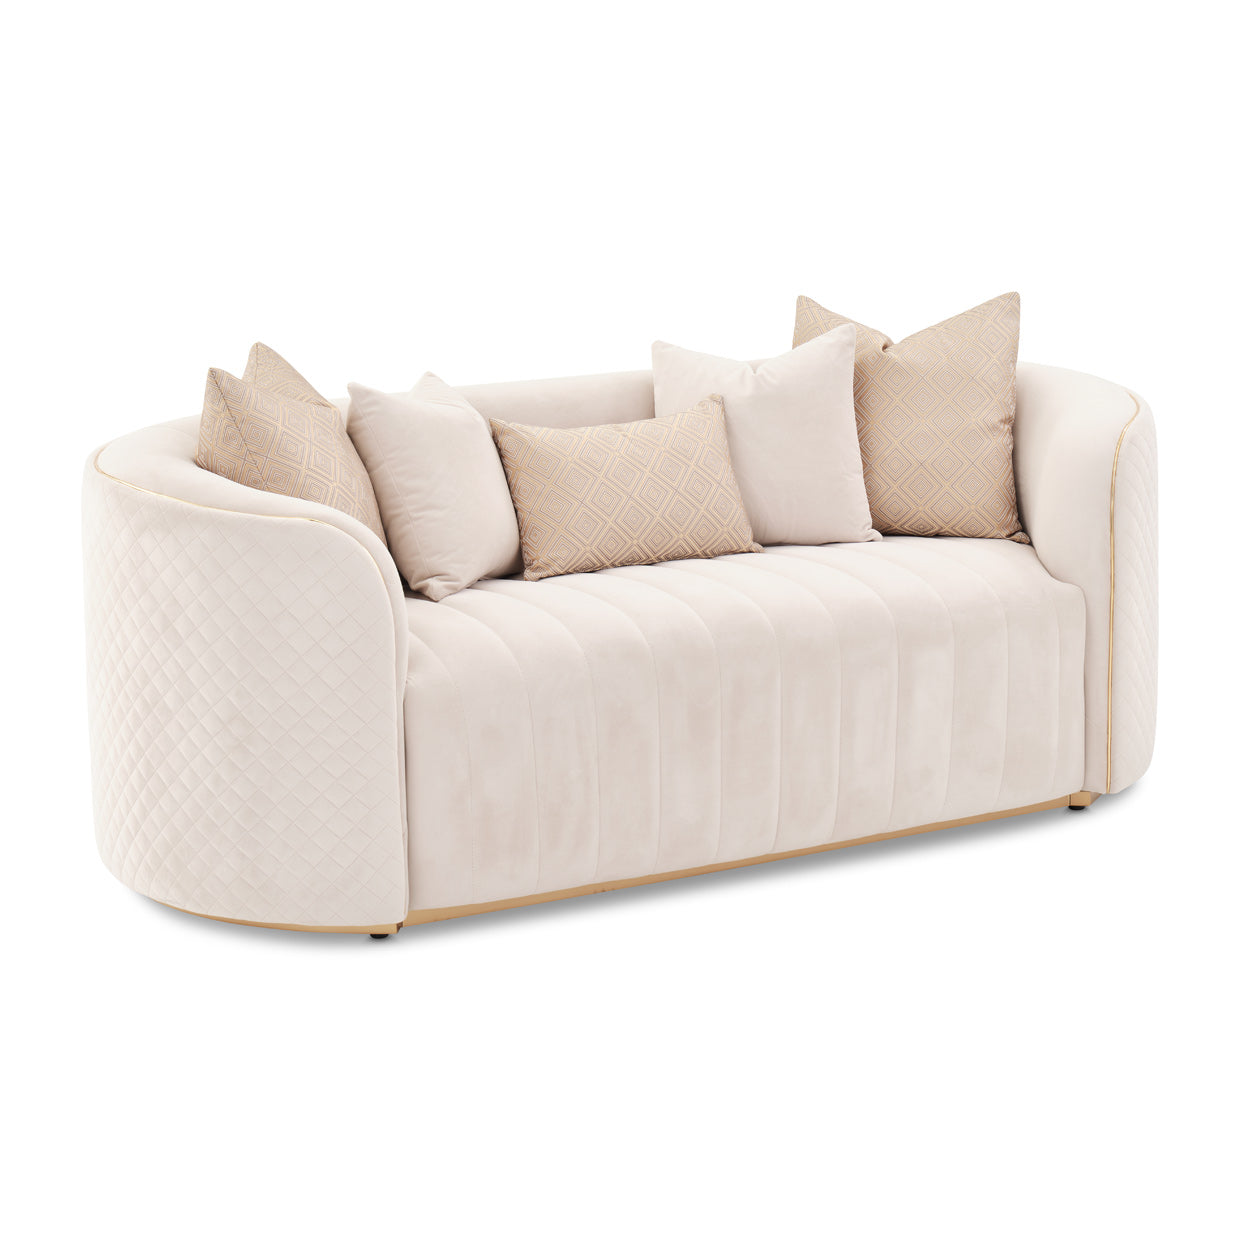 Ariana loveseat, Intimate luxury, Exquisite accent pillows, Gold jacquard, Velvety beige, plushness, Oblong centerpiece, Personal seating experience, Quiet evenings, Heartfelt, conversations, michael amini, Loveseat, Beige,  Gold, dream art 